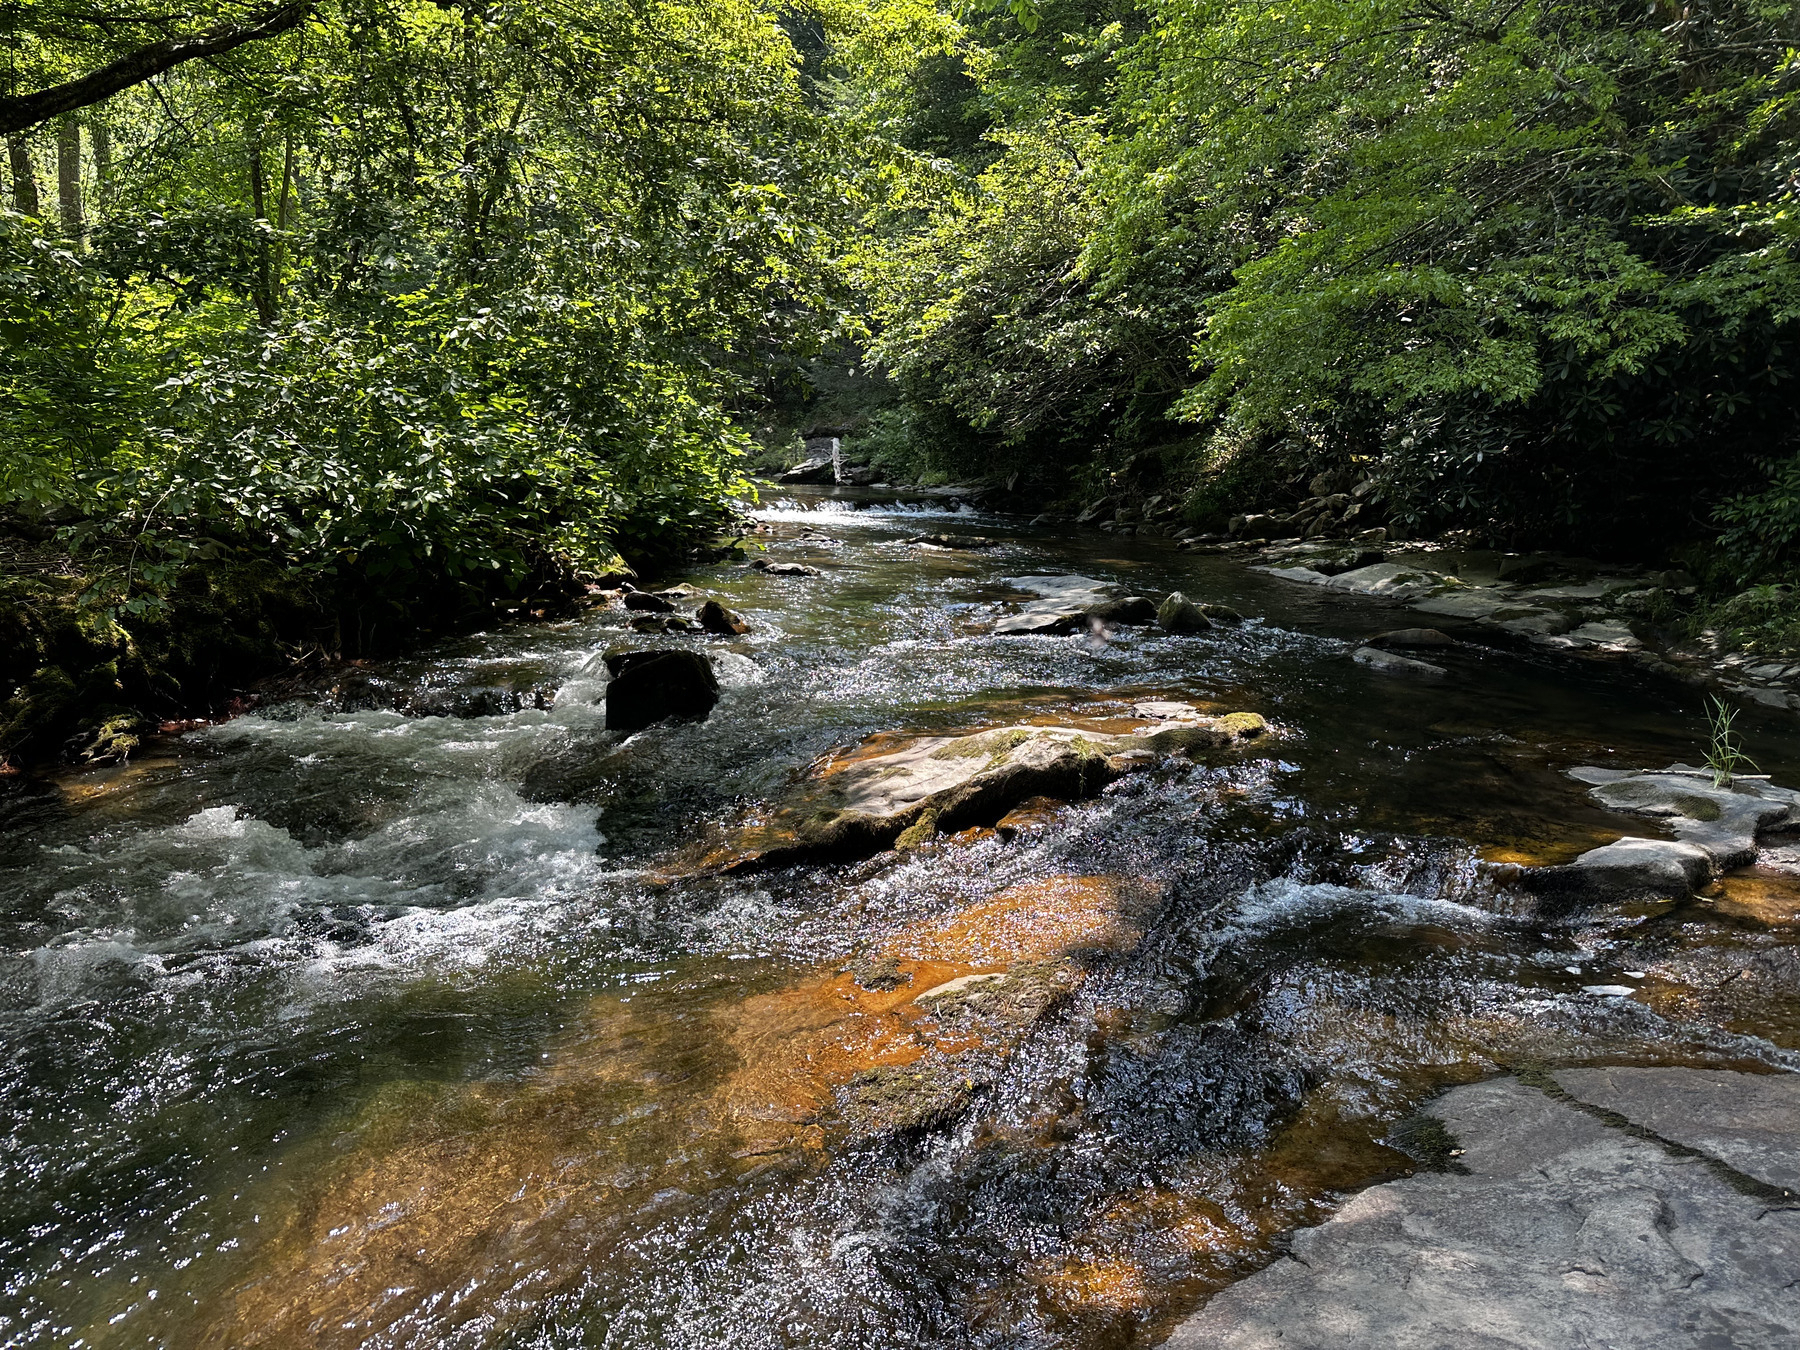 A mountain stream flows over rocks. Green foliage hangs low near the water.  